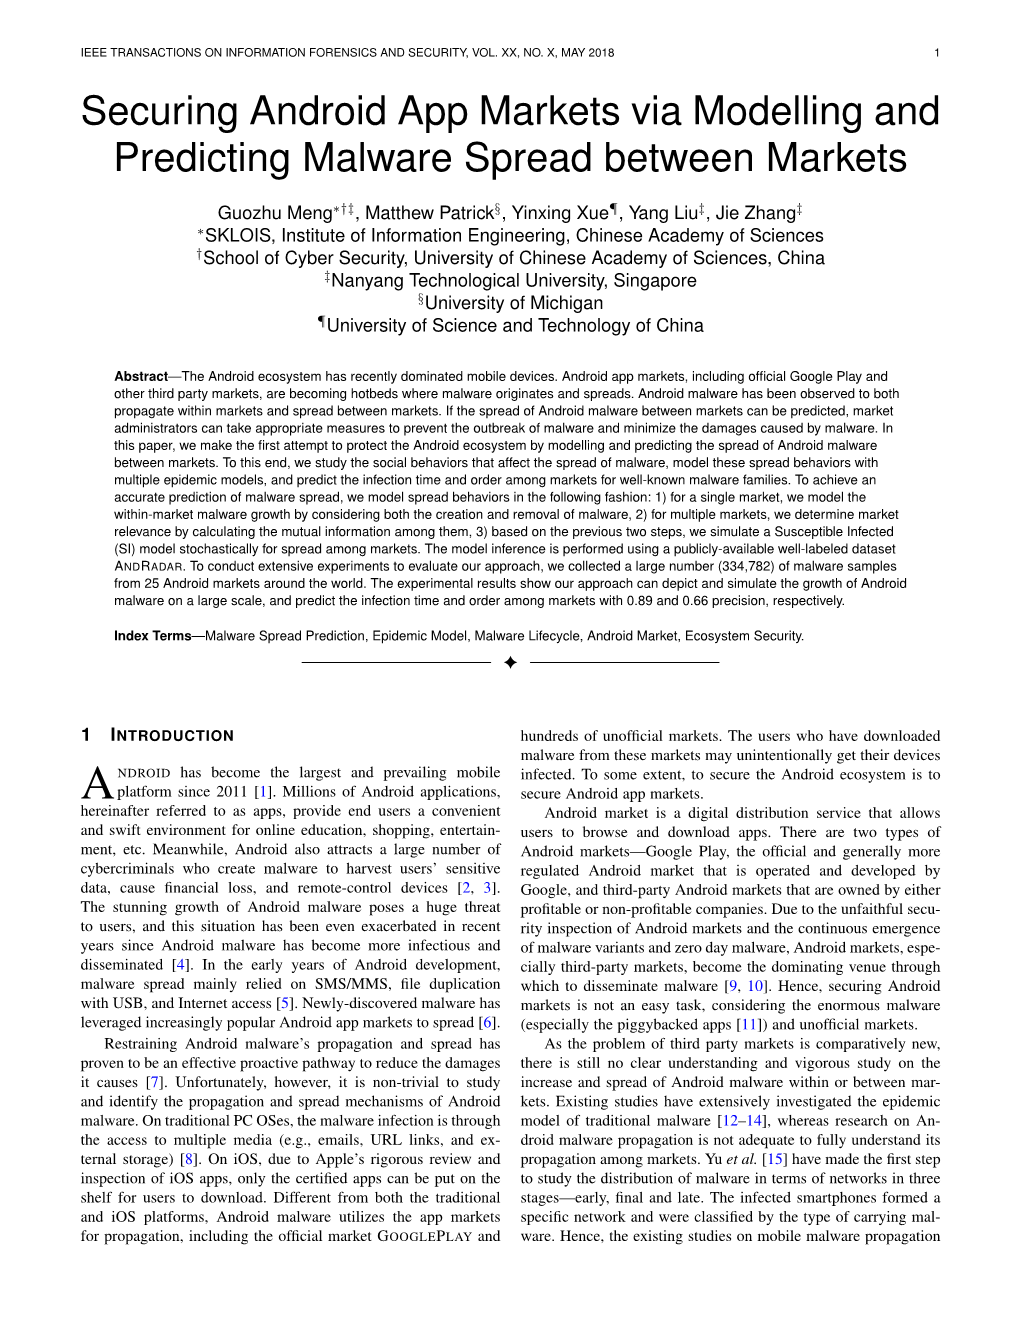 Securing Android App Markets Via Modelling and Predicting Malware Spread Between Markets